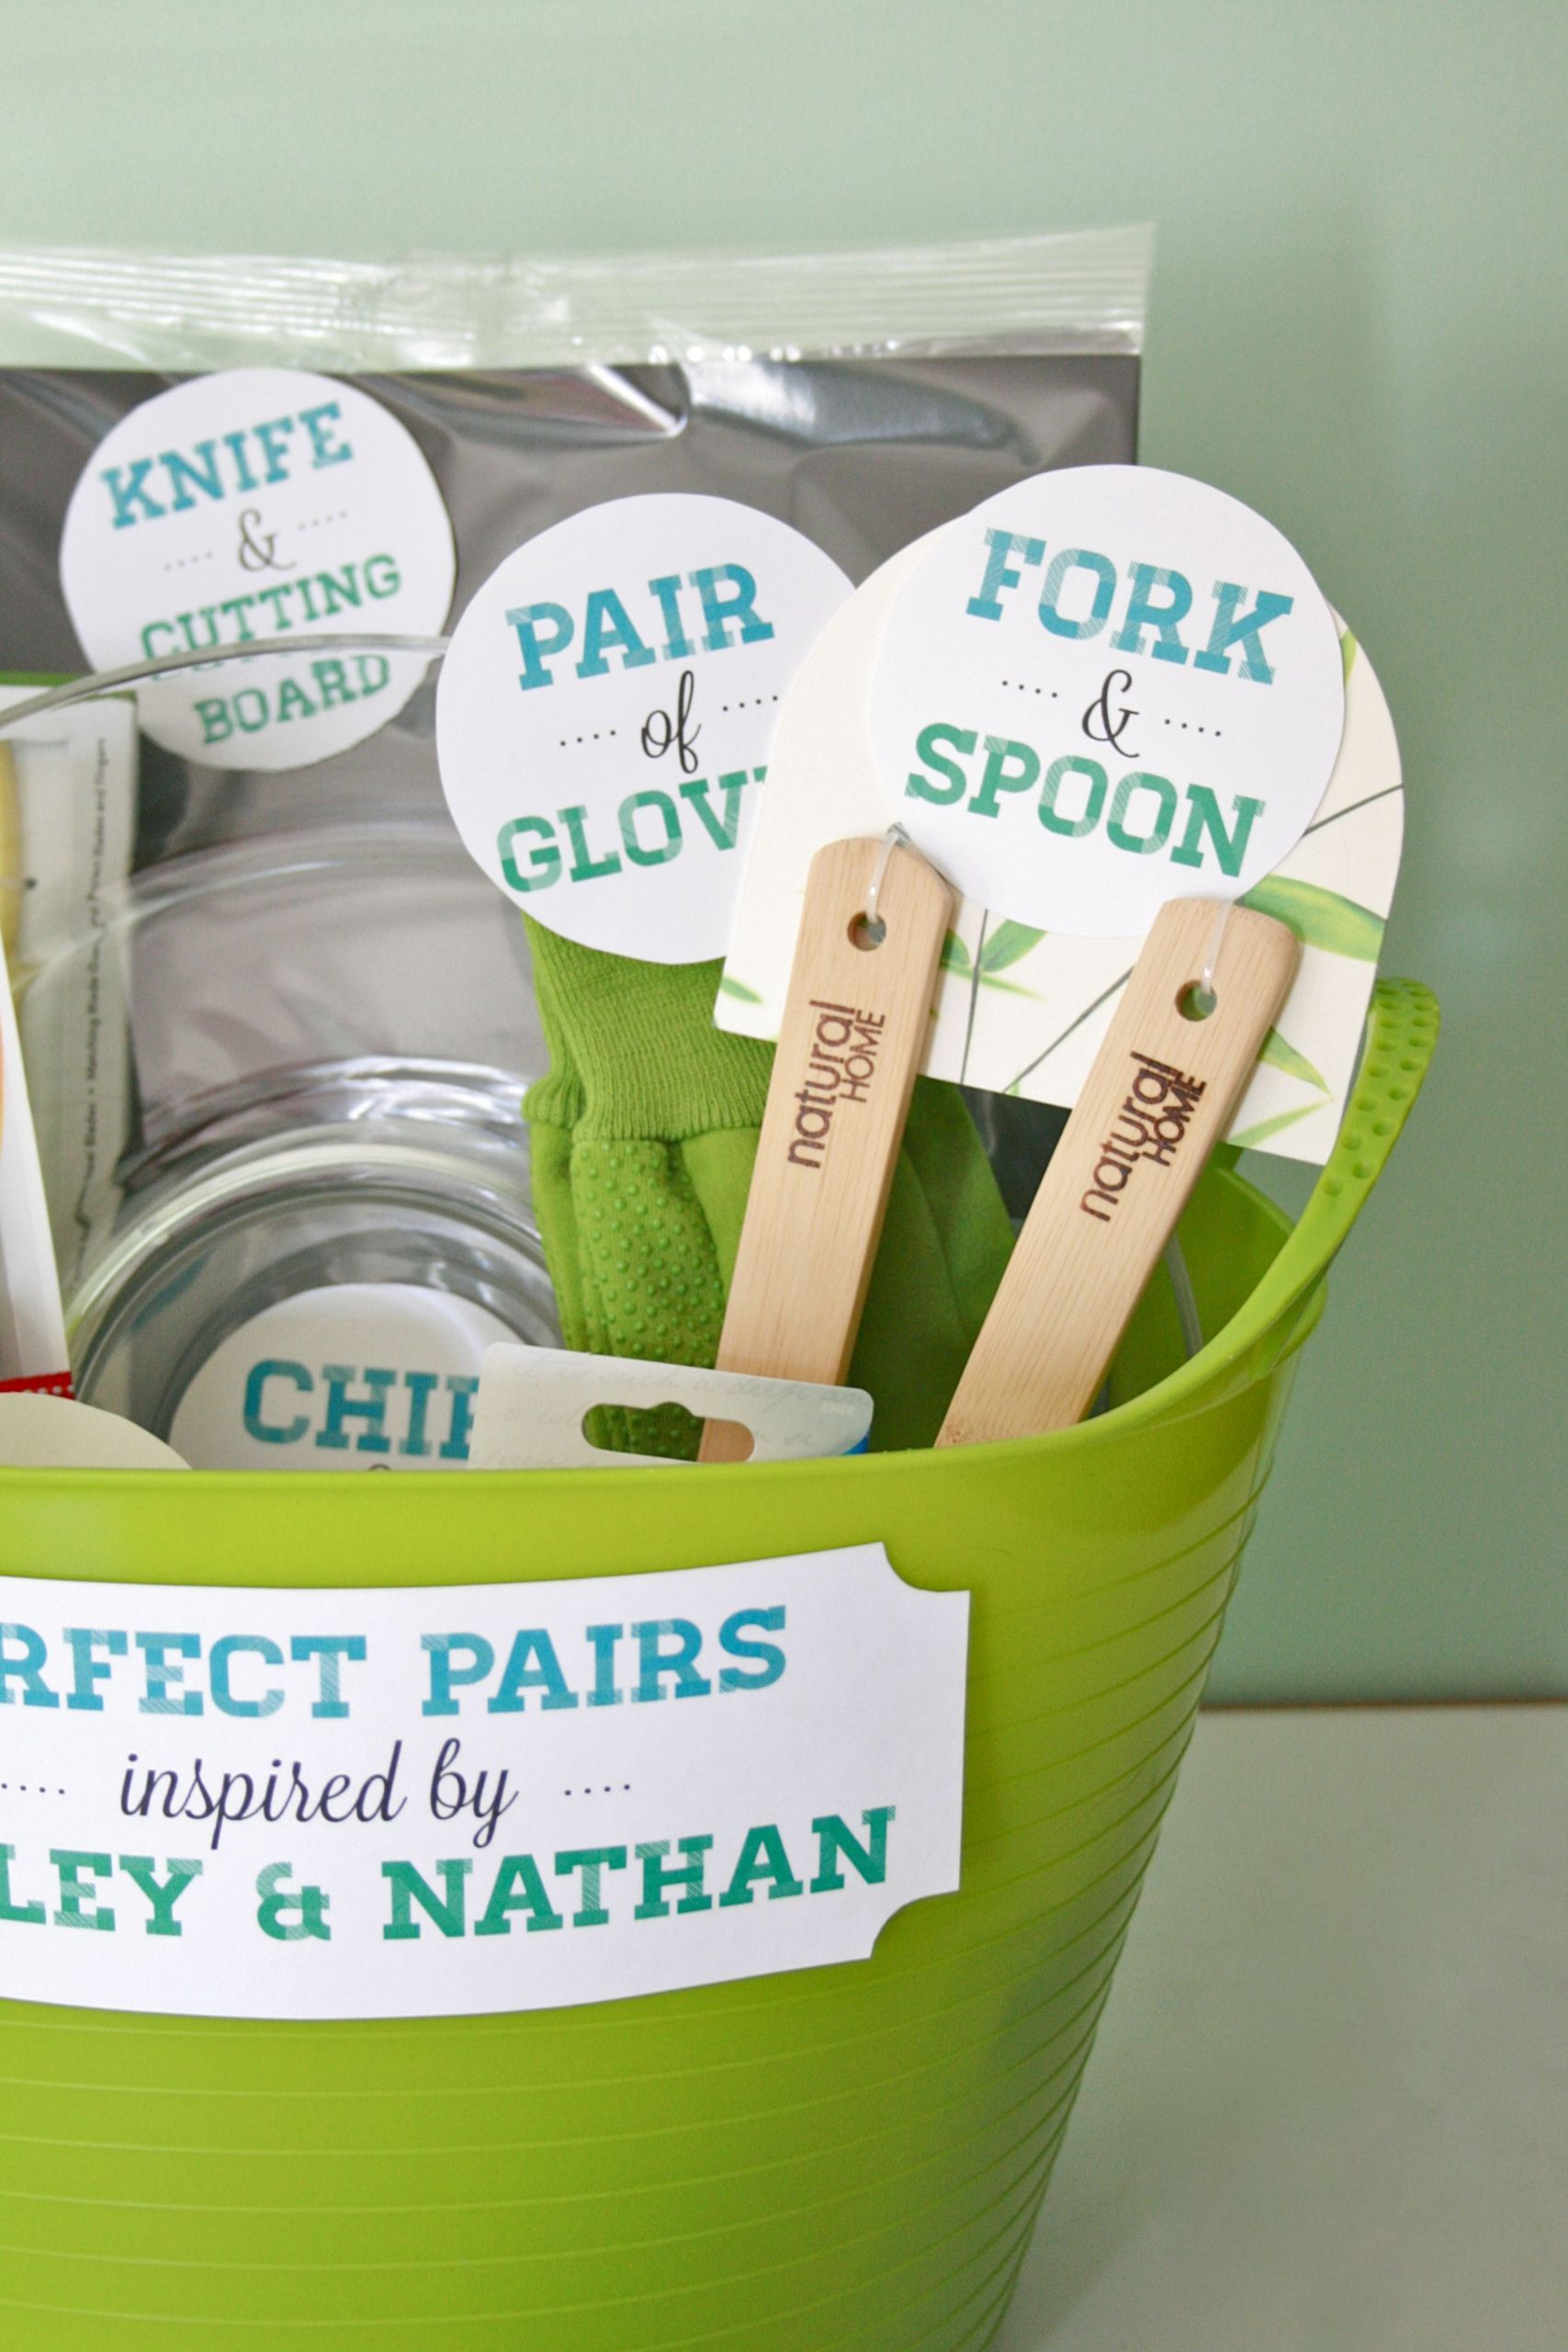 Bridal Shower Gift Ideas From Mother Of The Bride
 DIY "Perfect Pairs" Bridal Shower Gift